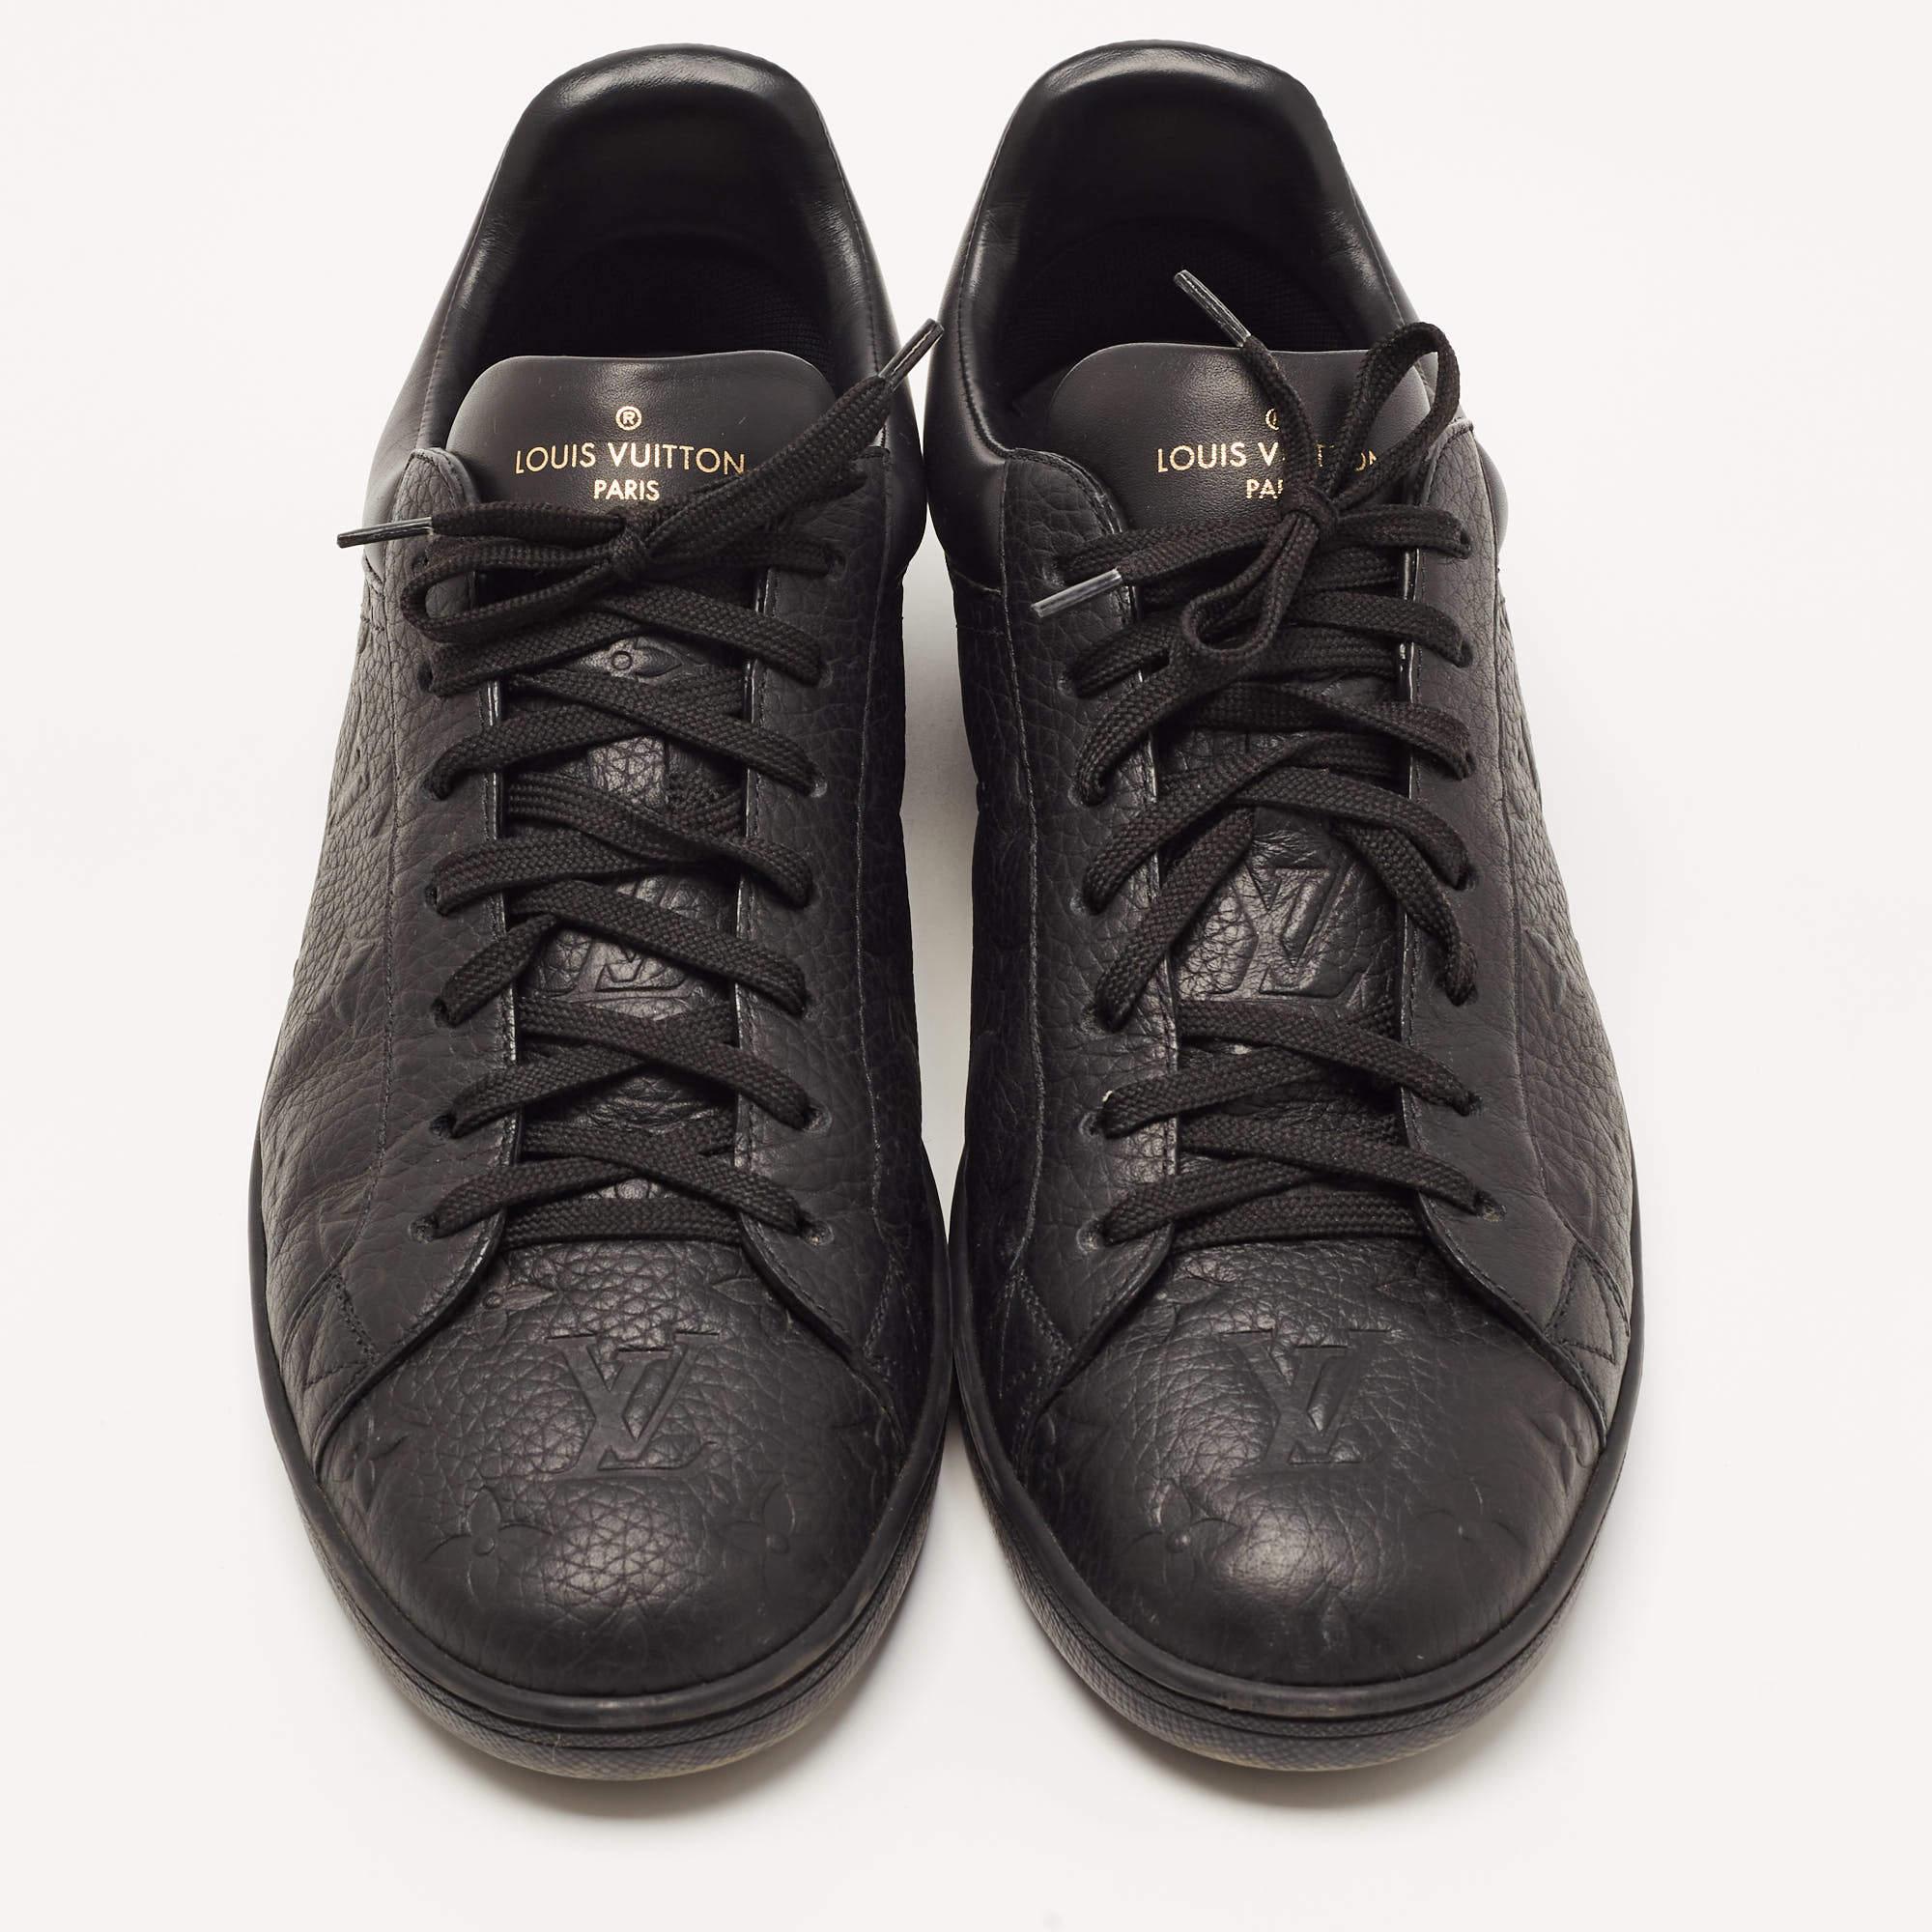 Coming in a classic silhouette, these designer sneakers are a seamless combination of luxury, comfort, and style. These sneakers are designed with signature details and comfortable insoles.

Includes: Original Dustbag

